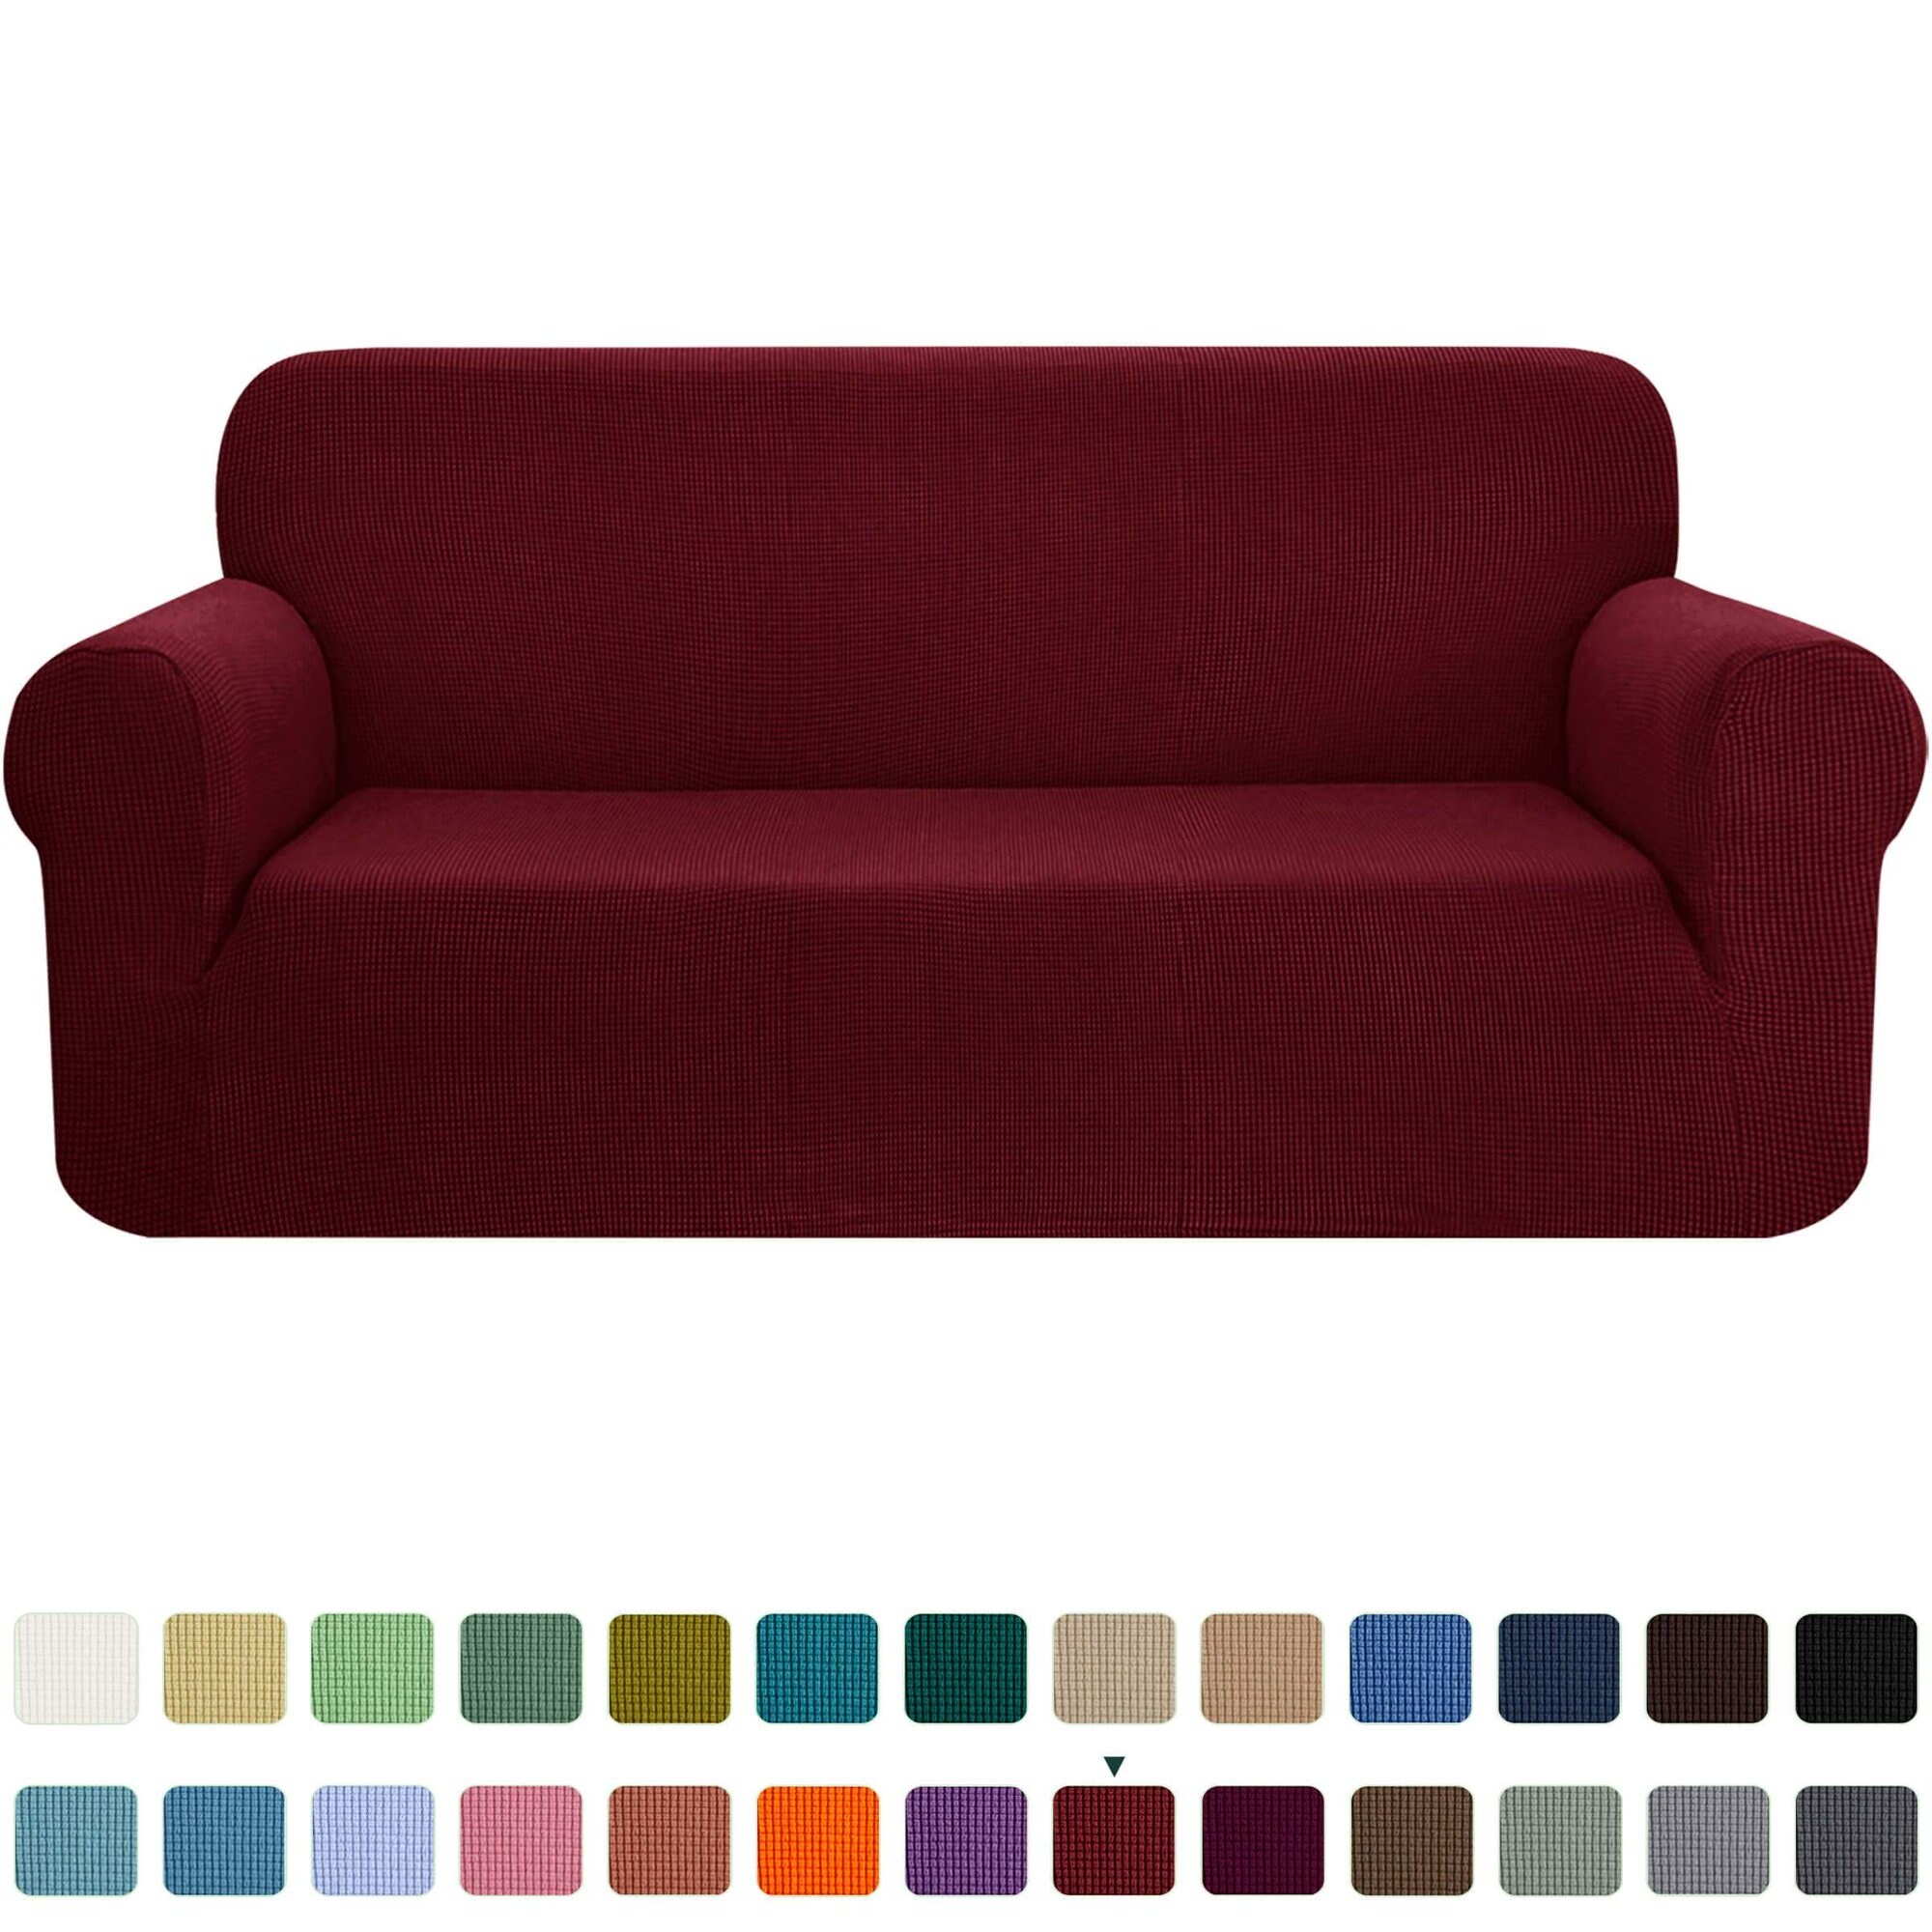 https://ak1.ostkcdn.com/images/products/is/images/direct/717a28e209c9e5d8113dfffff18ec47fe1f39a2f/CHUN-YI-1-Piece-Stretch-Loveseat-Slipcover-Checks-Couch-Cover.jpg